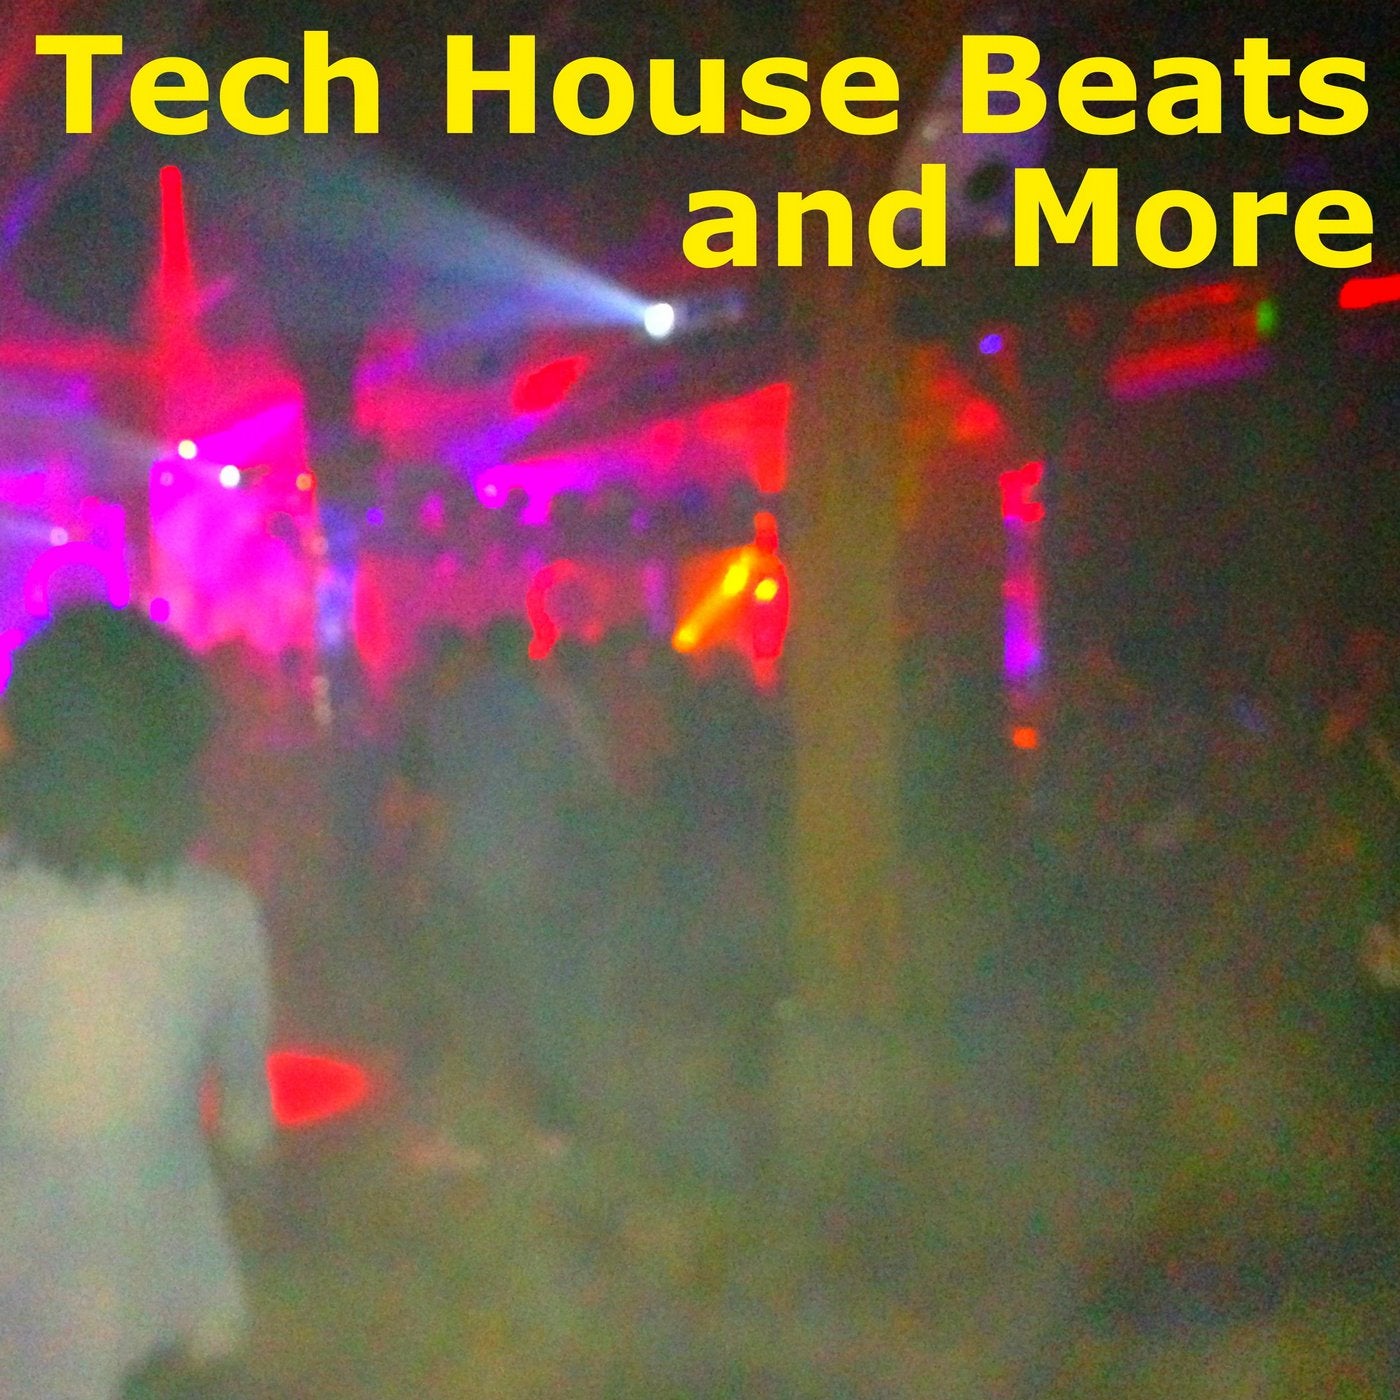 Tech House Beats and More